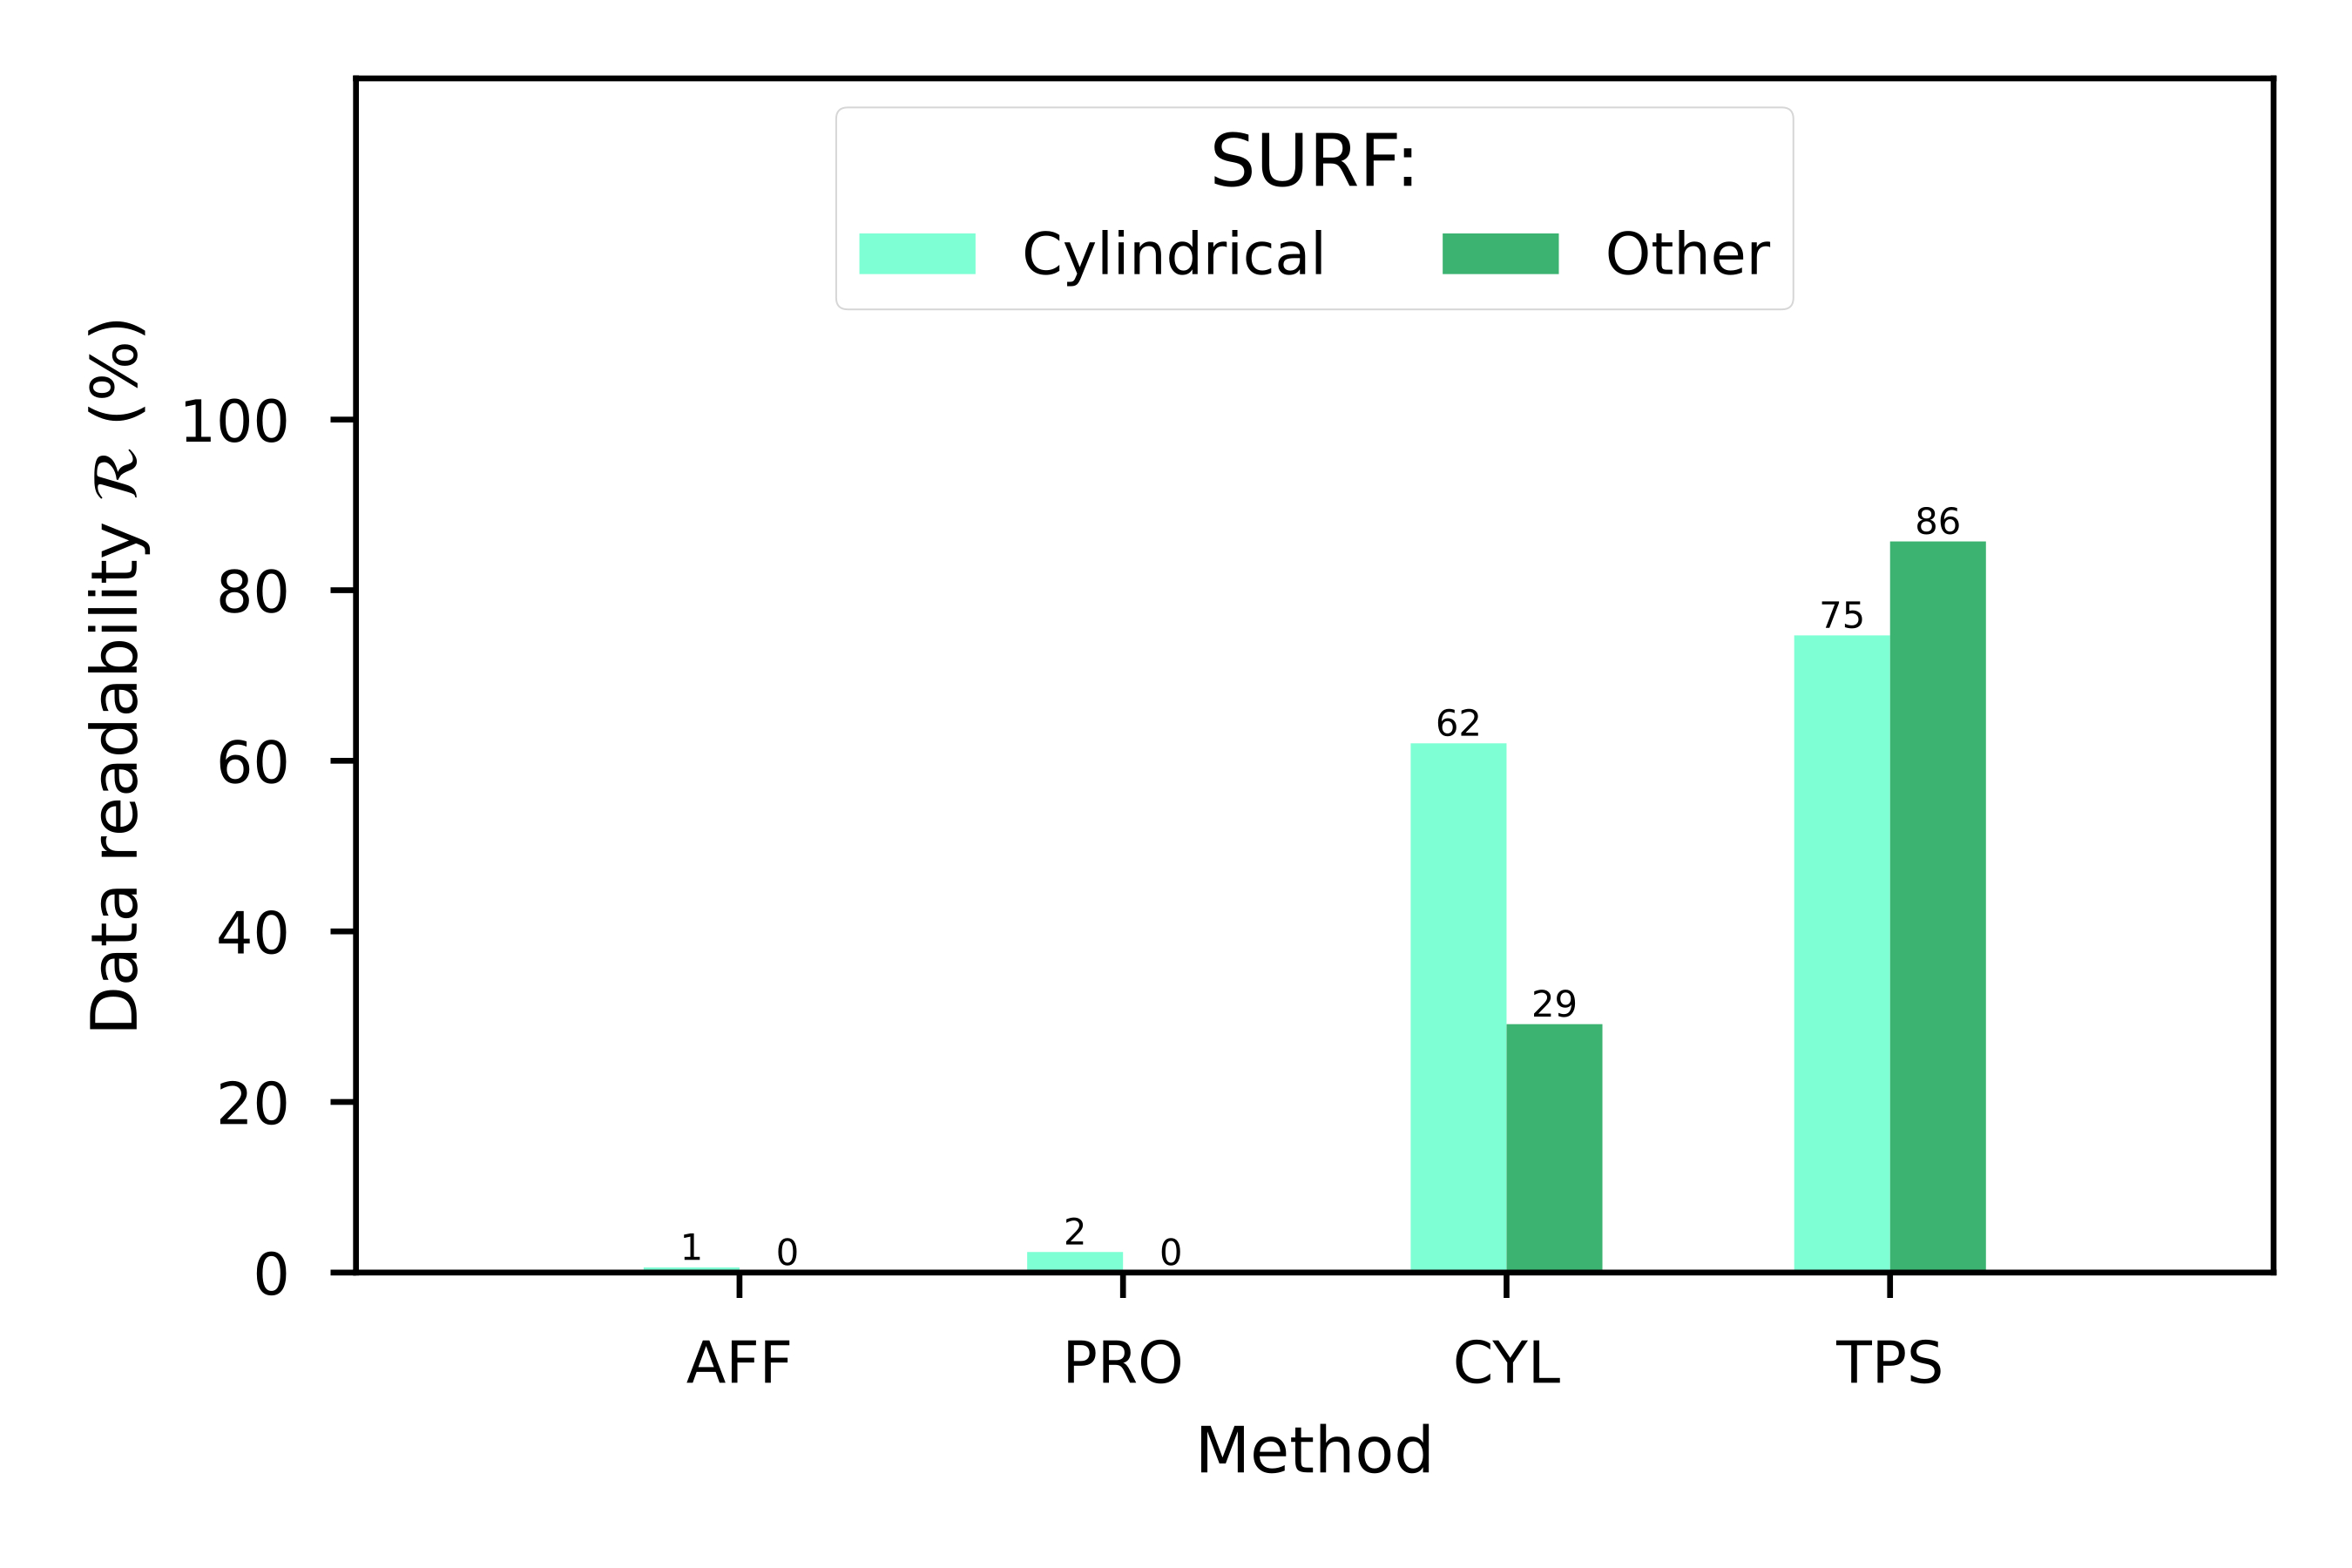 Data readability (\mathcal{R}) of the SURF dataset segregated by the kind of deformation (cylindrical or other) that the QR Codes were exposed to, for each transformation method (AFF, PRO, CYL and TPS). 